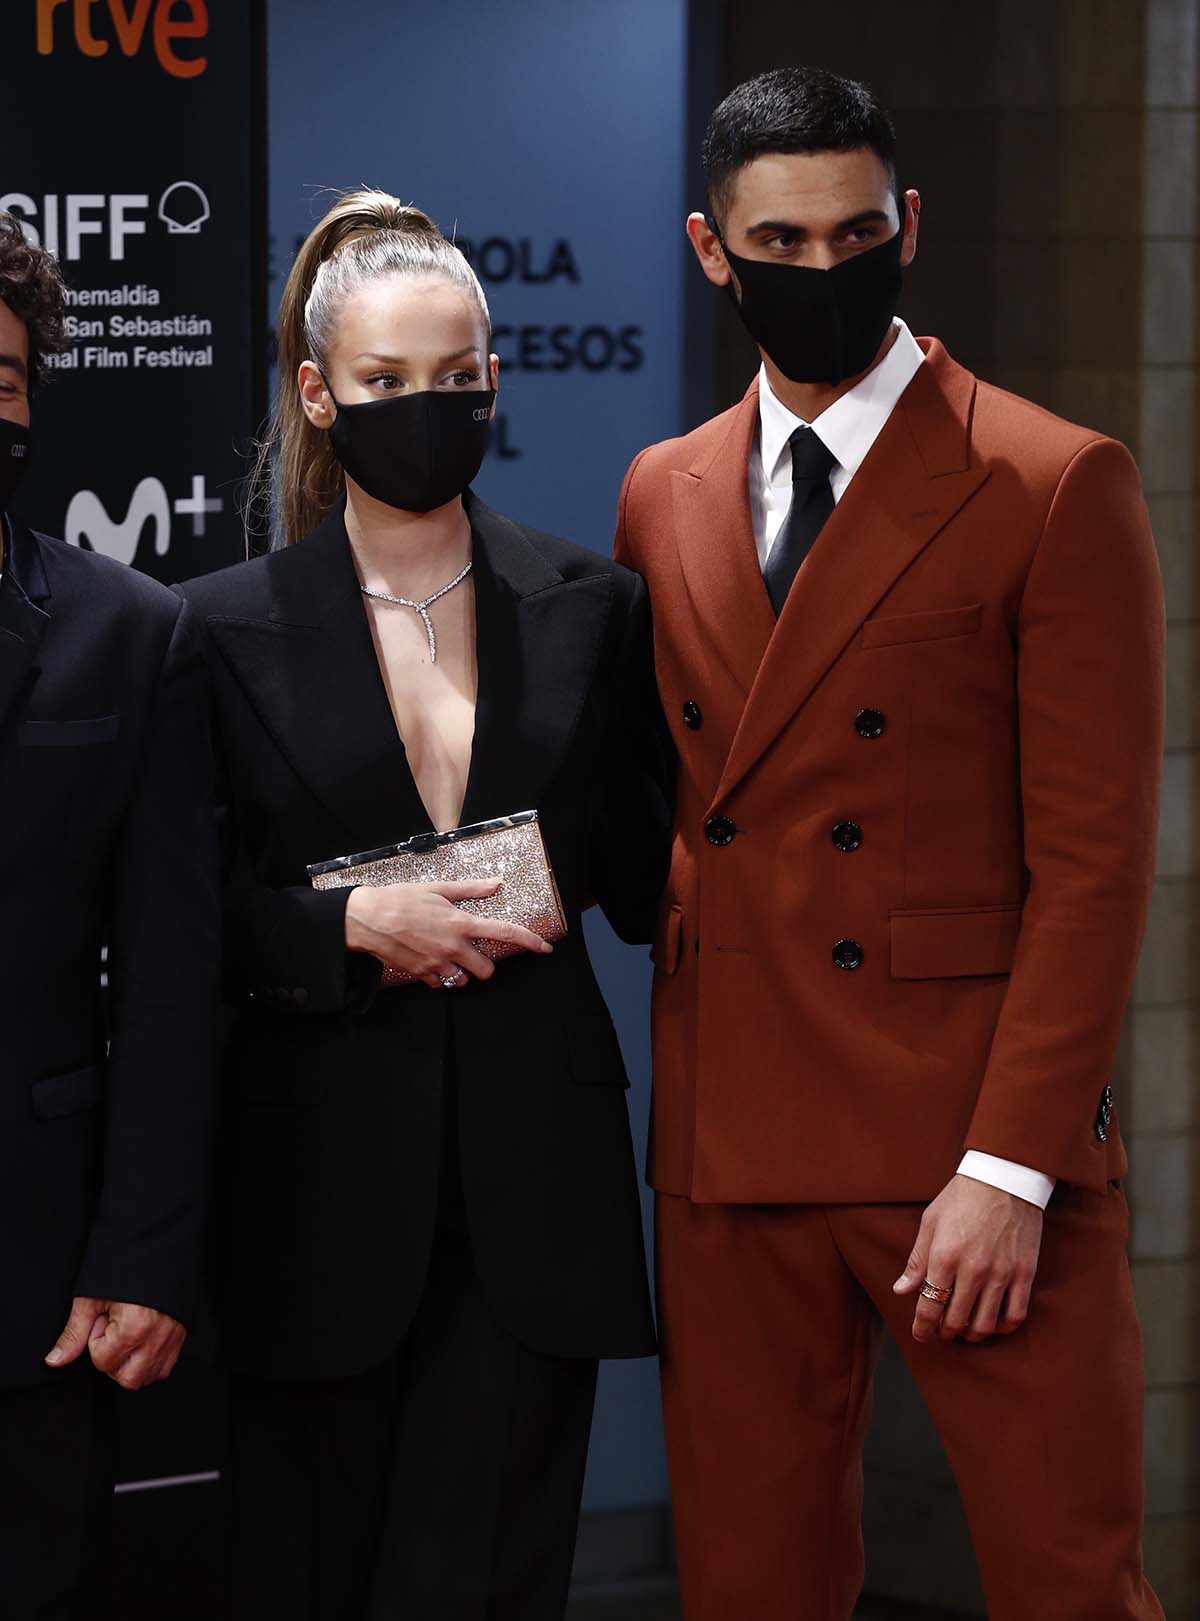 Actors Esther Exposito and Alejandro Speitzer at photocall for closing ceremony during the 68th San Sebastian Film Festival in San Sebastian, Spain, on 26 September, 2020.